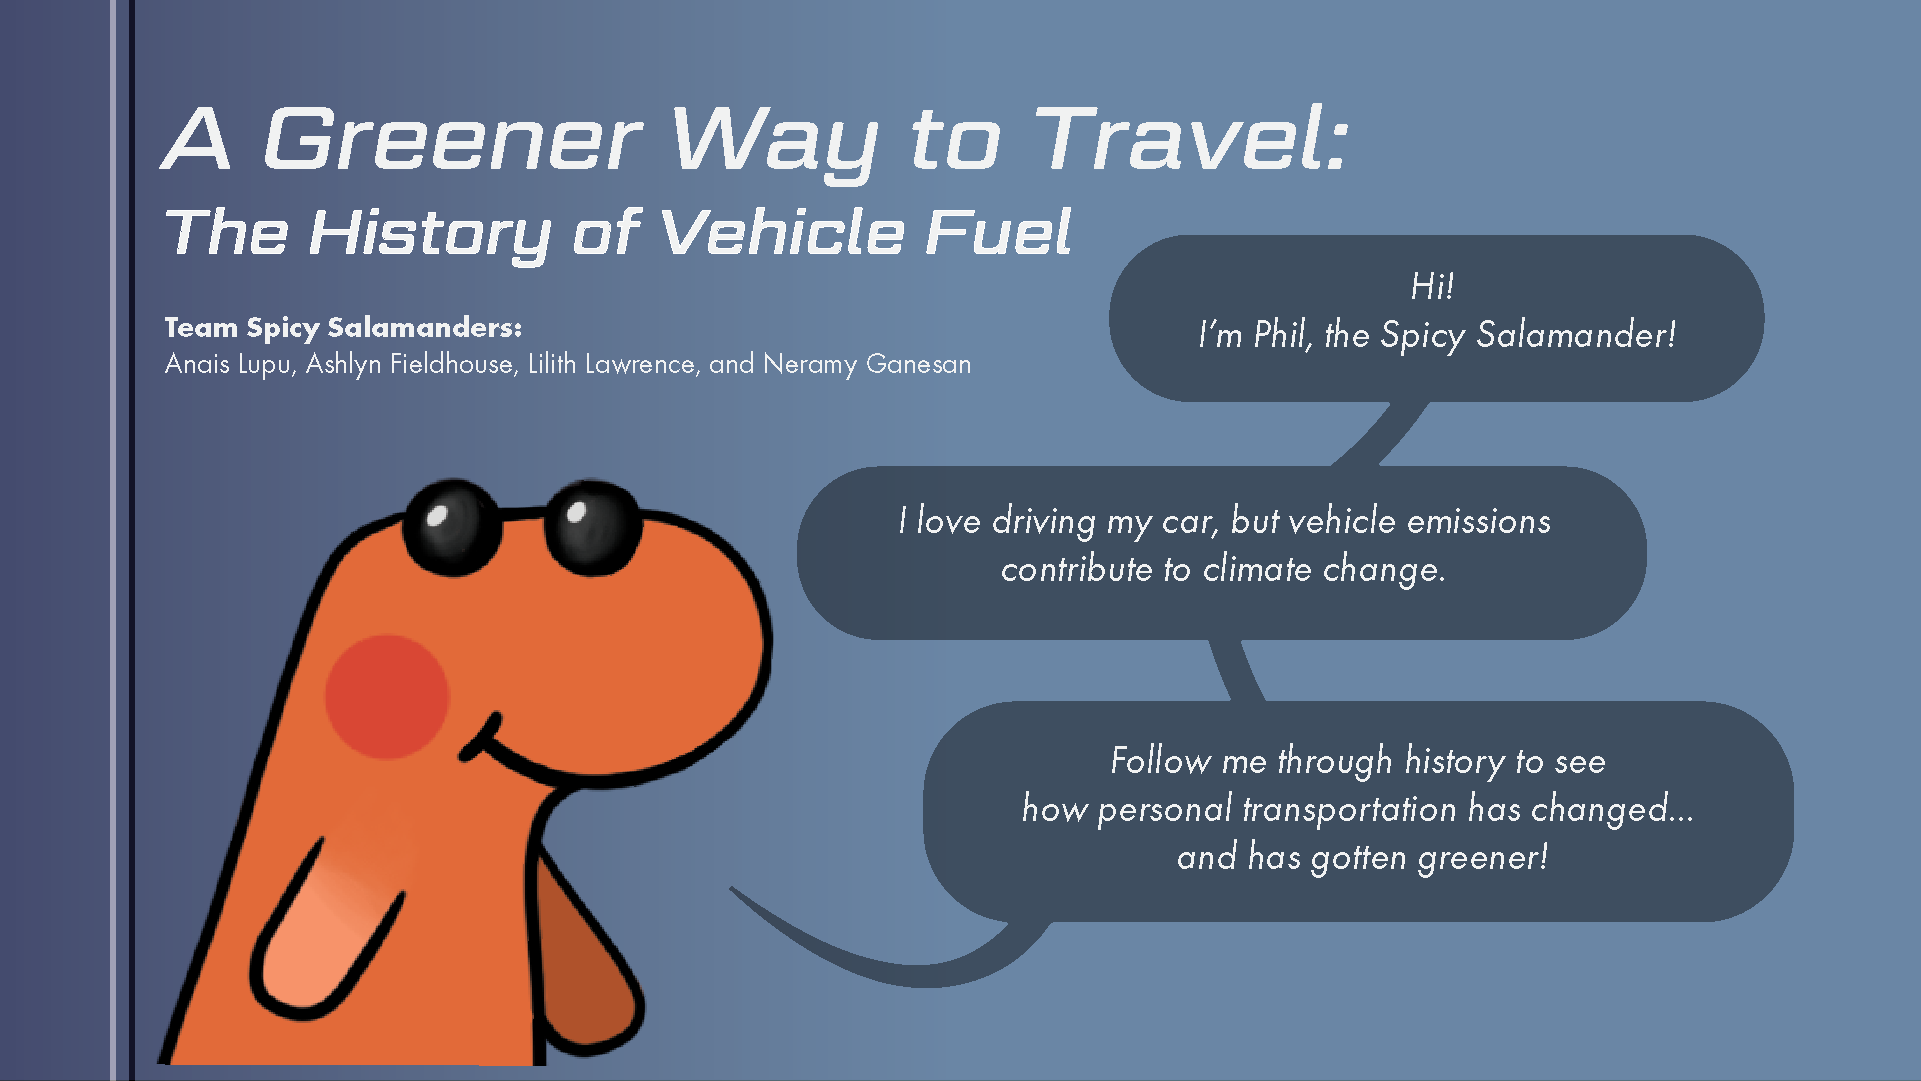 A Greener Way to Travel by Team Spicy Salamanders